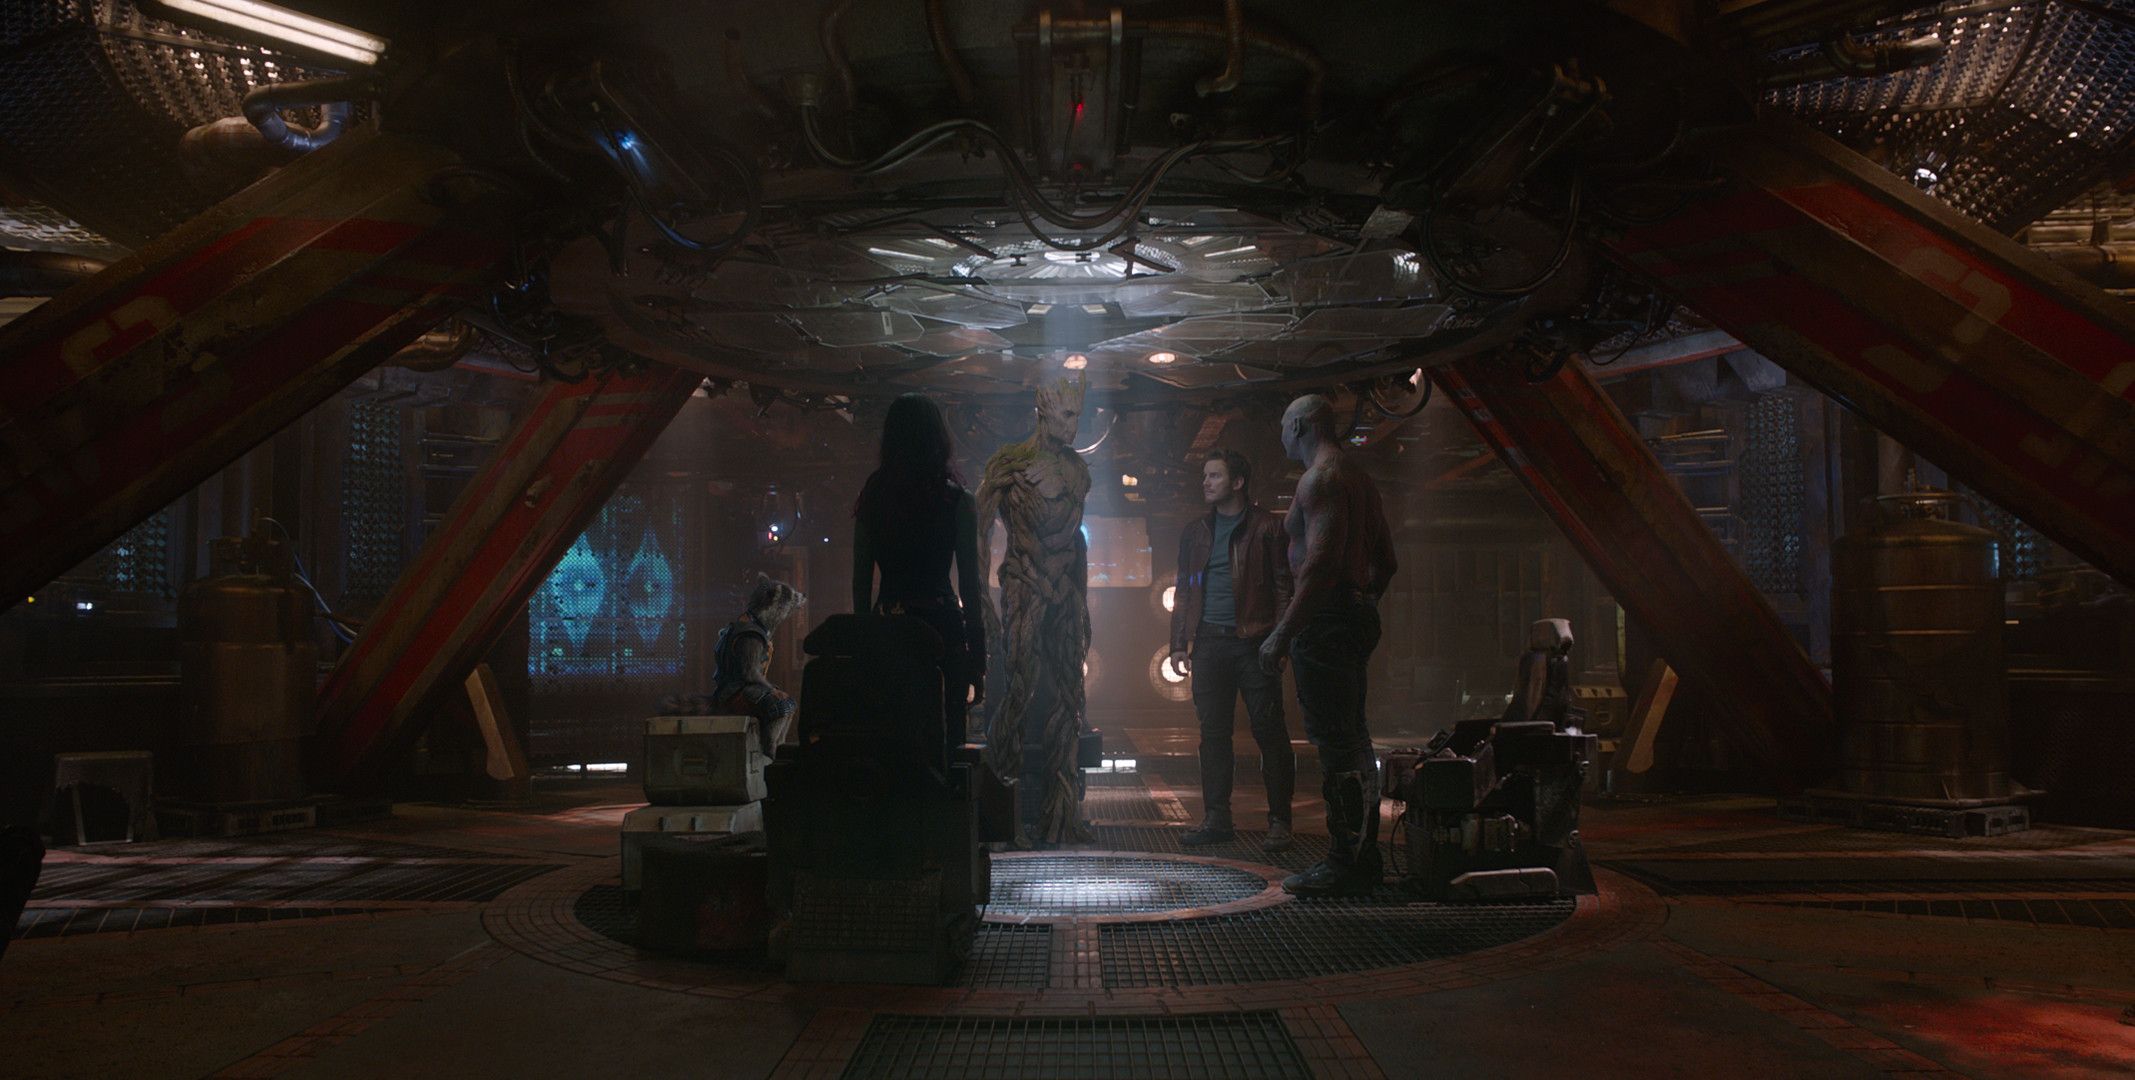 Guardians of the Galaxy Photo 3